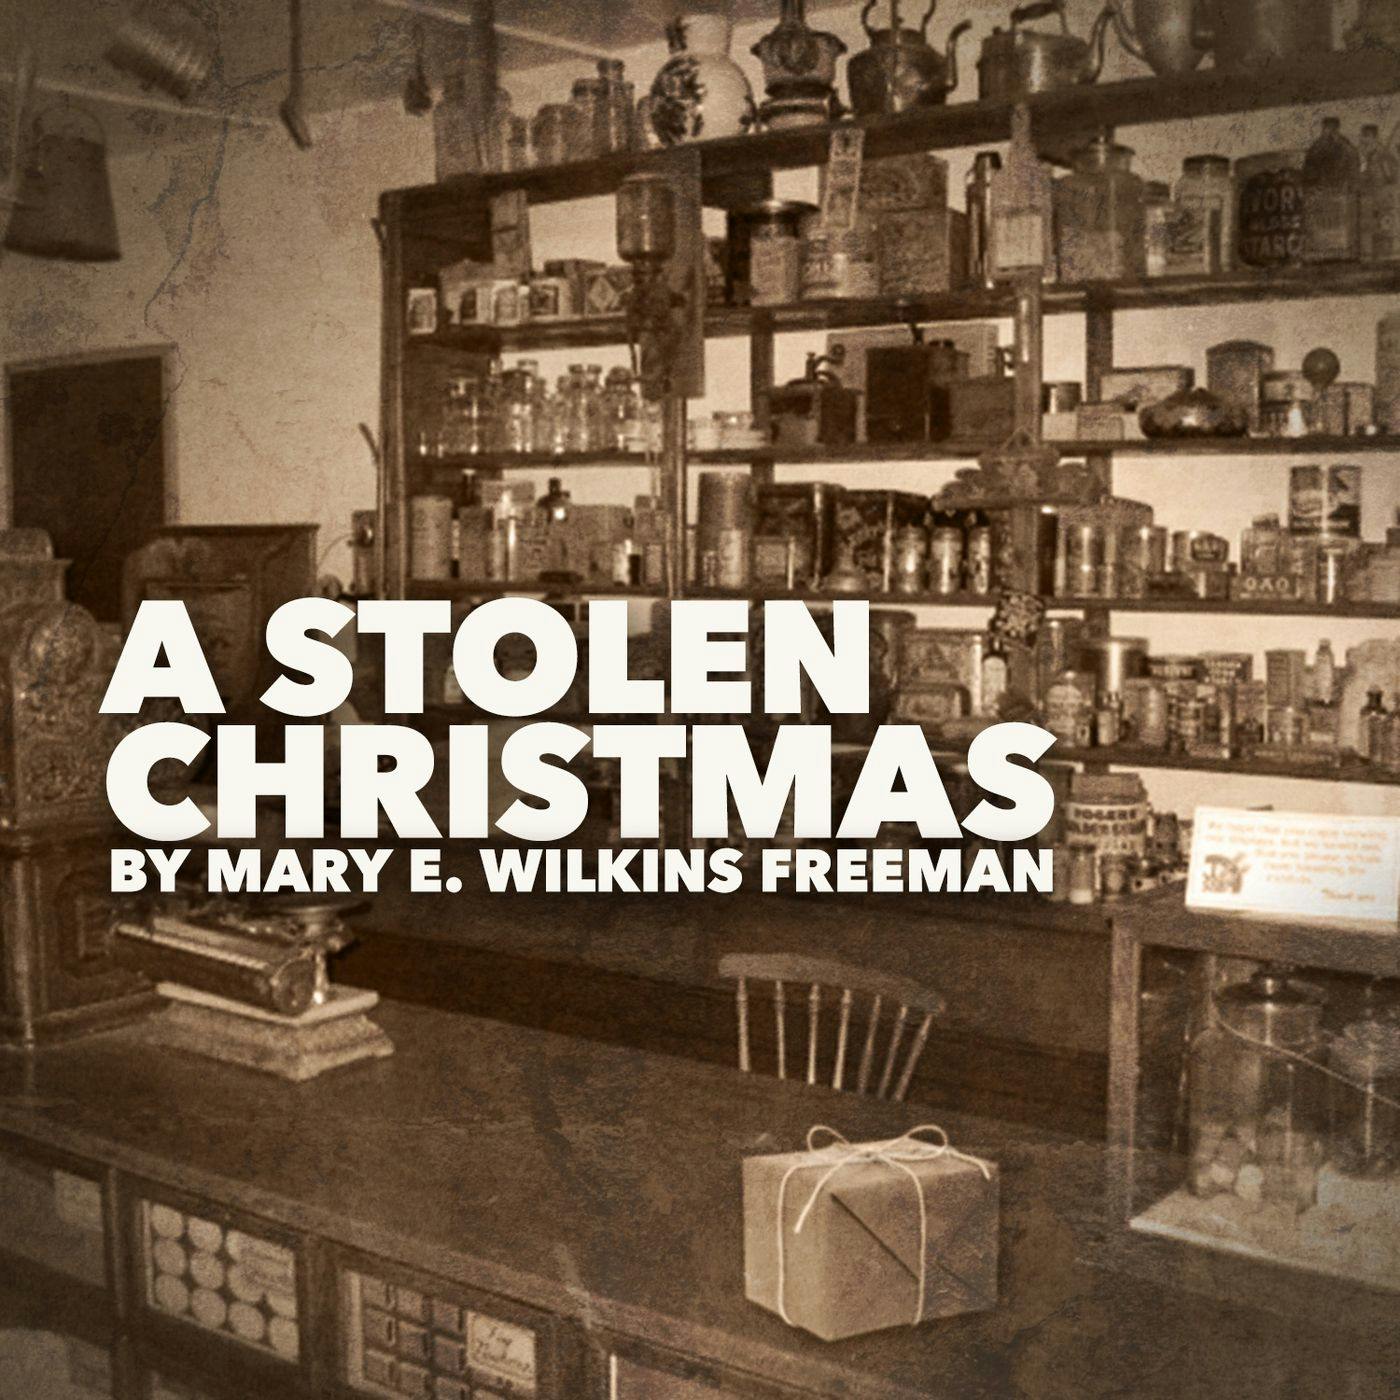 A Stolen Christmas by Mary E. Wilkins Freeman - A Classic Christmas Story